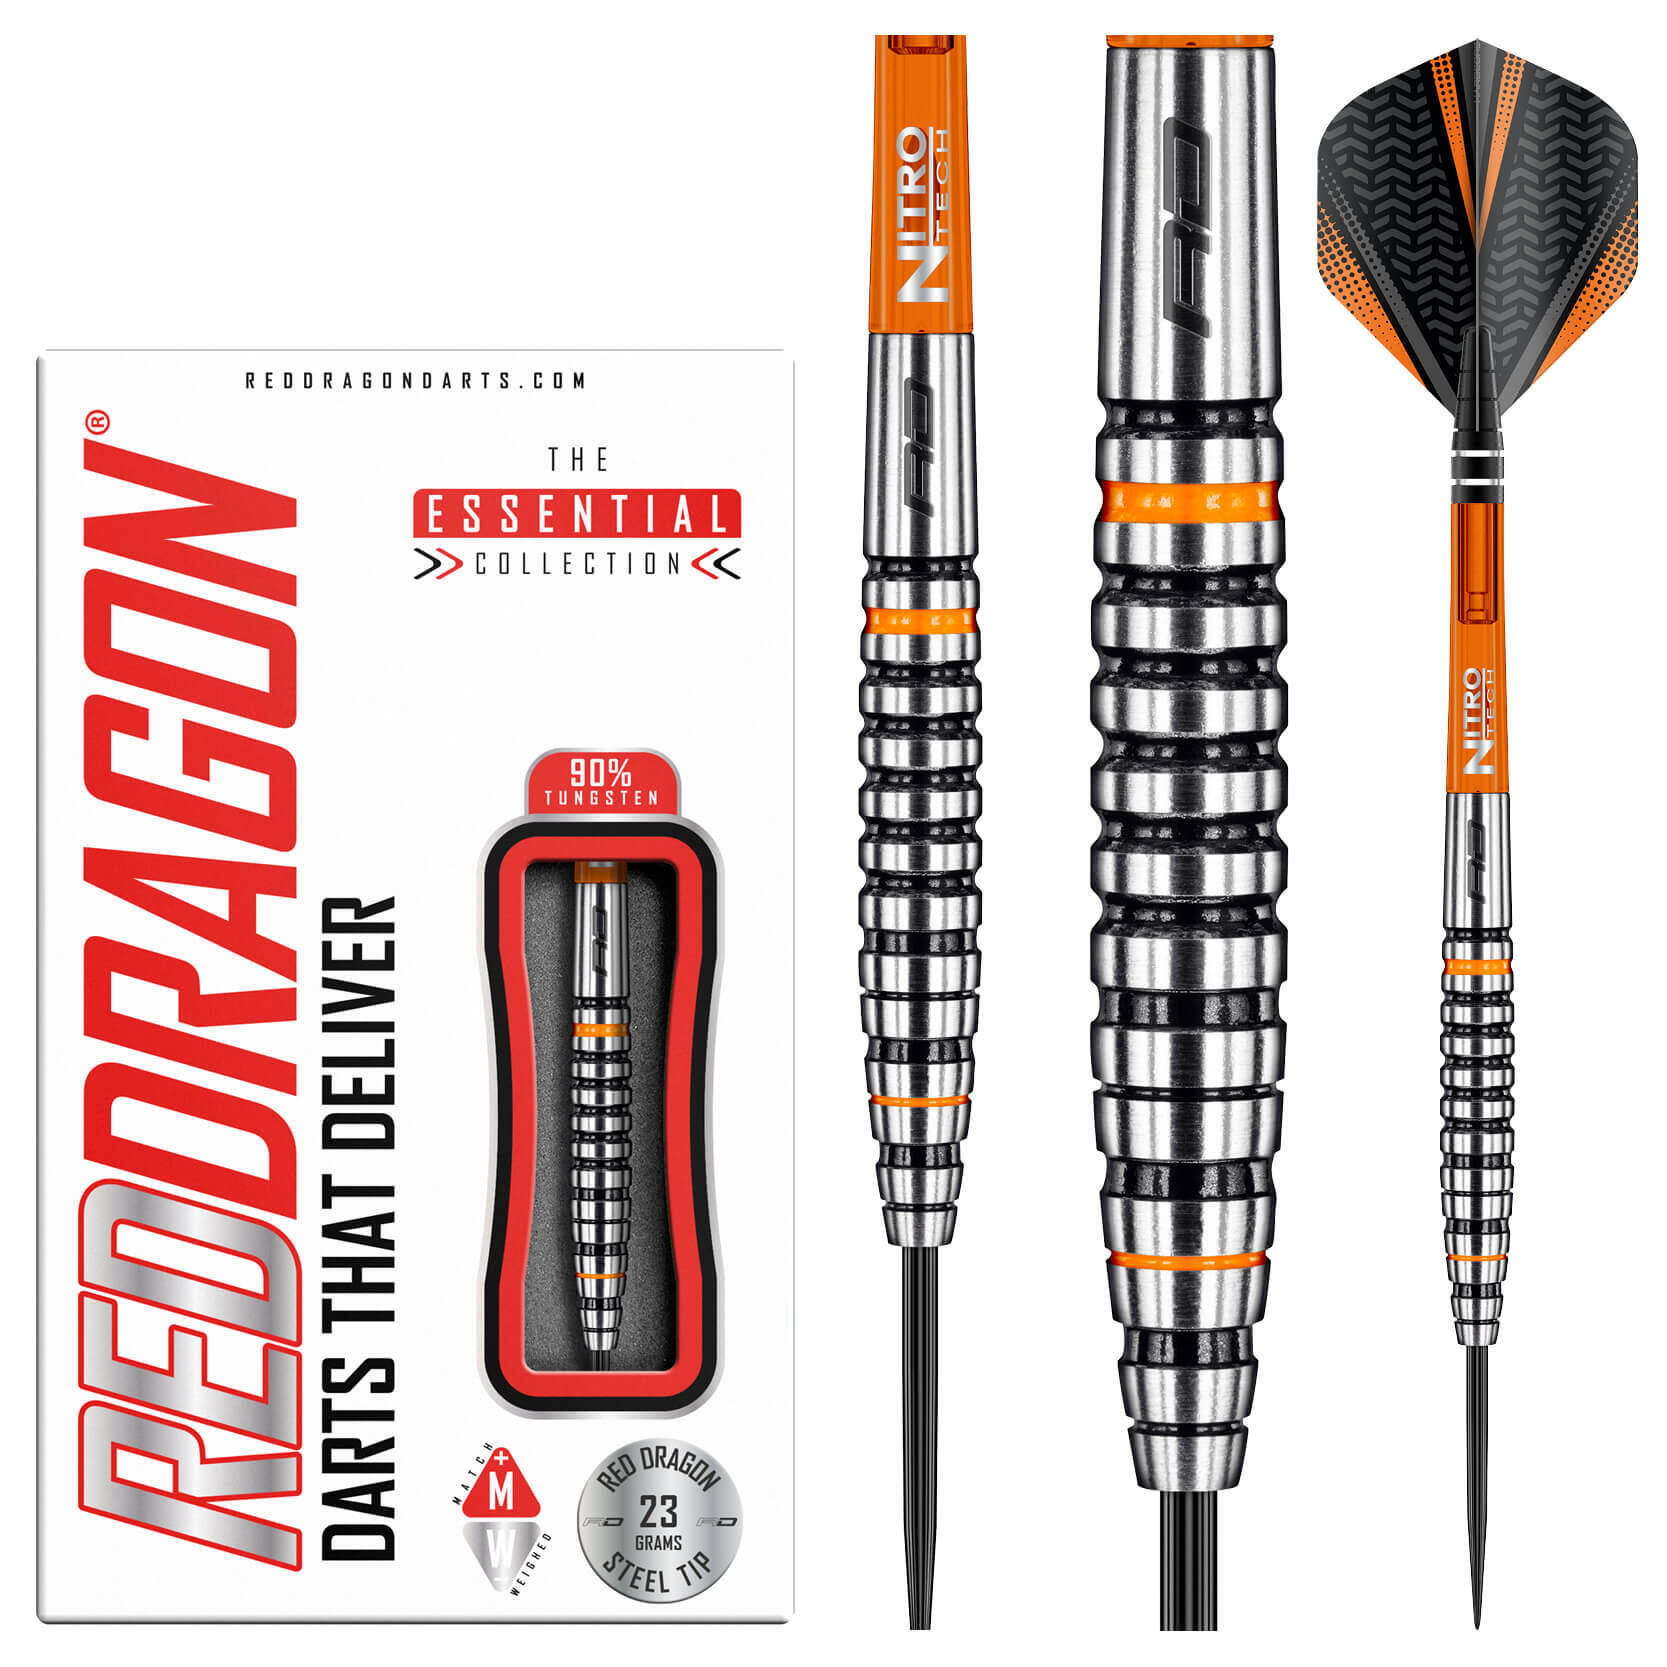 RED DRAGON DARTS Amberjack 14: 23g Tungsten Darts Set with Flights and Stems